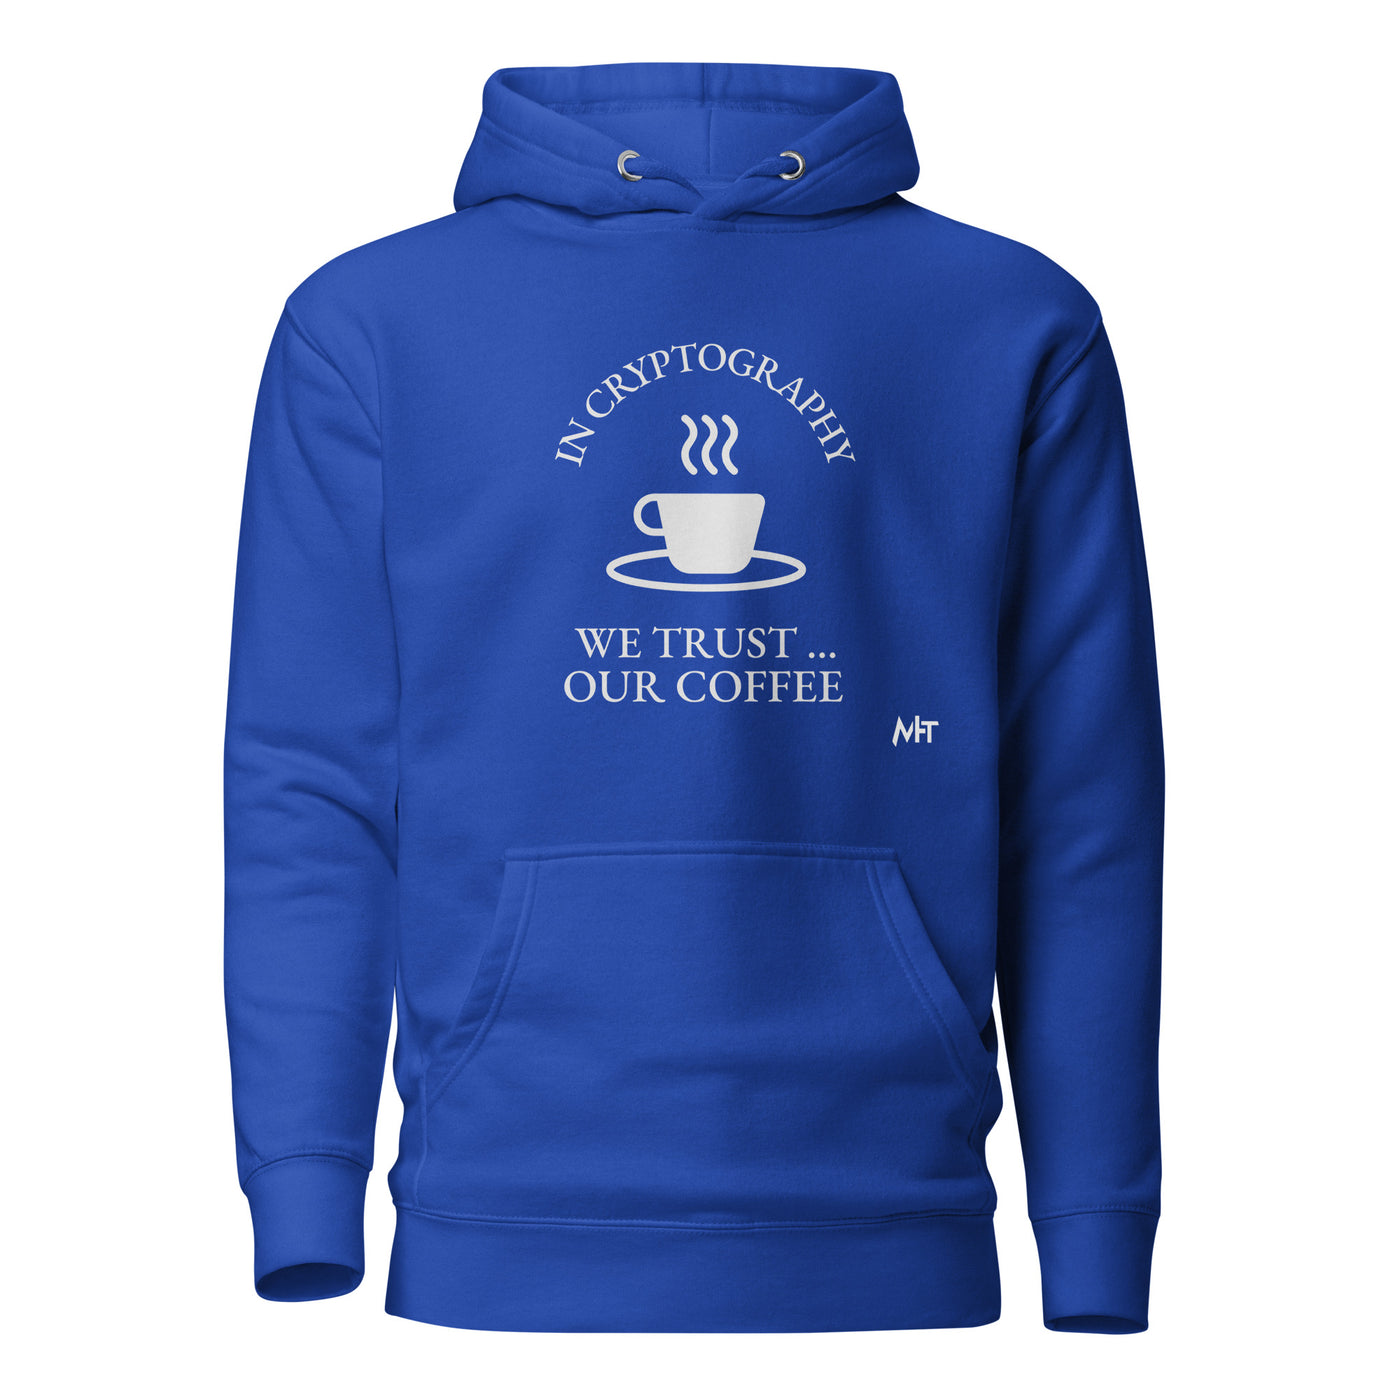 In cryptography, we trust... our coffee - Unisex Hoodie